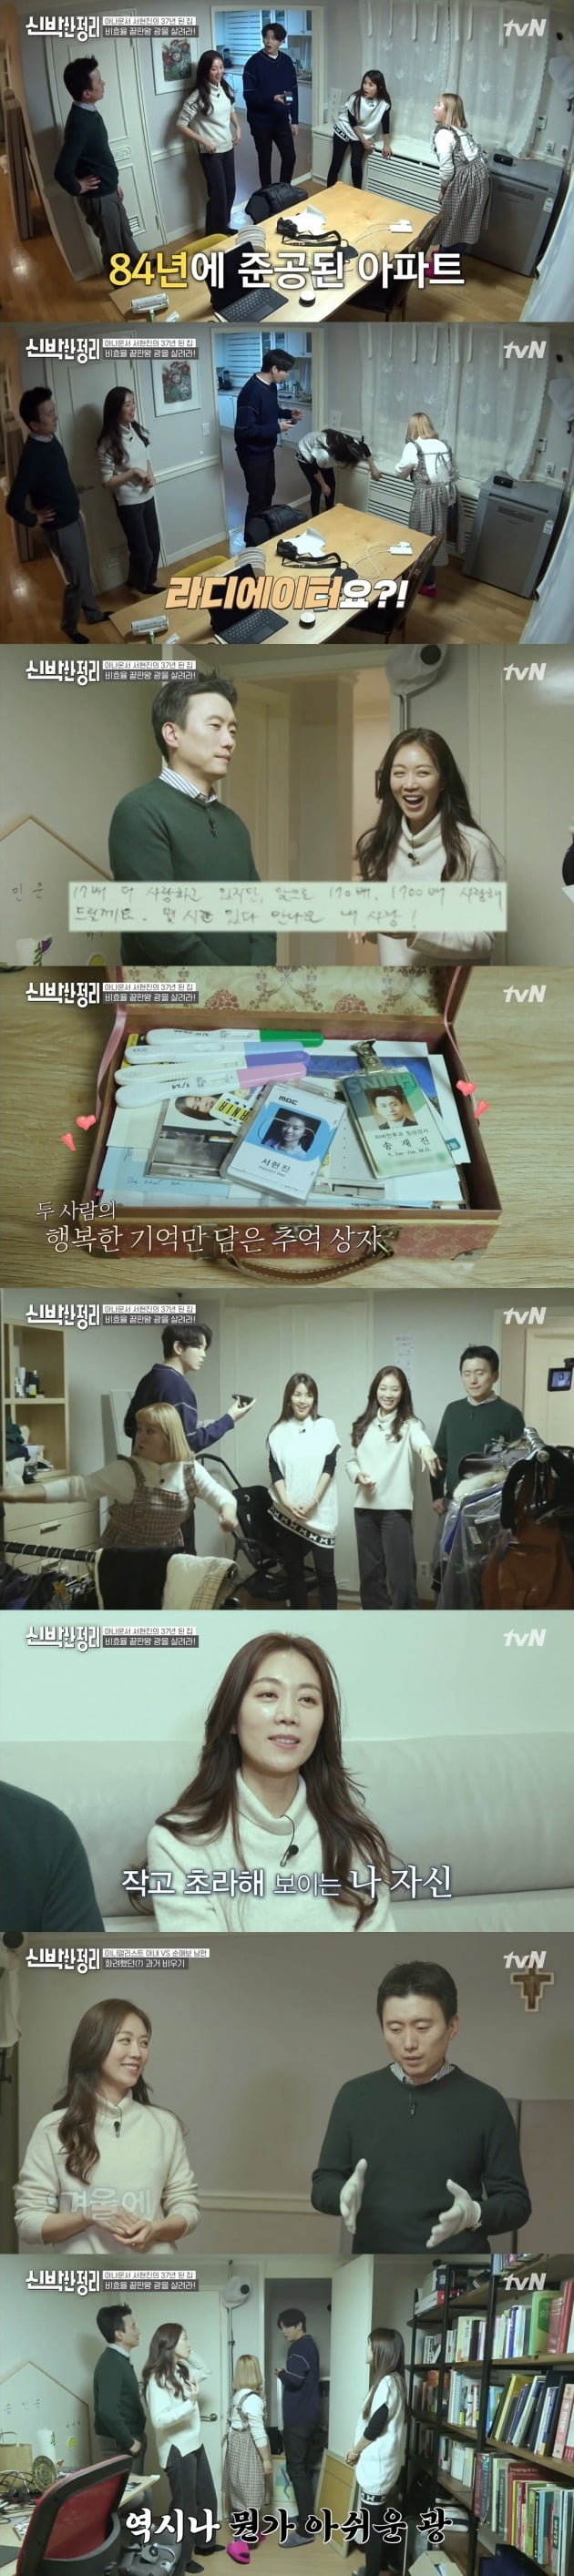 The doctor’s husband ♥ Seo Hyun-jin where is the apartment?  37 years old, 3 billion